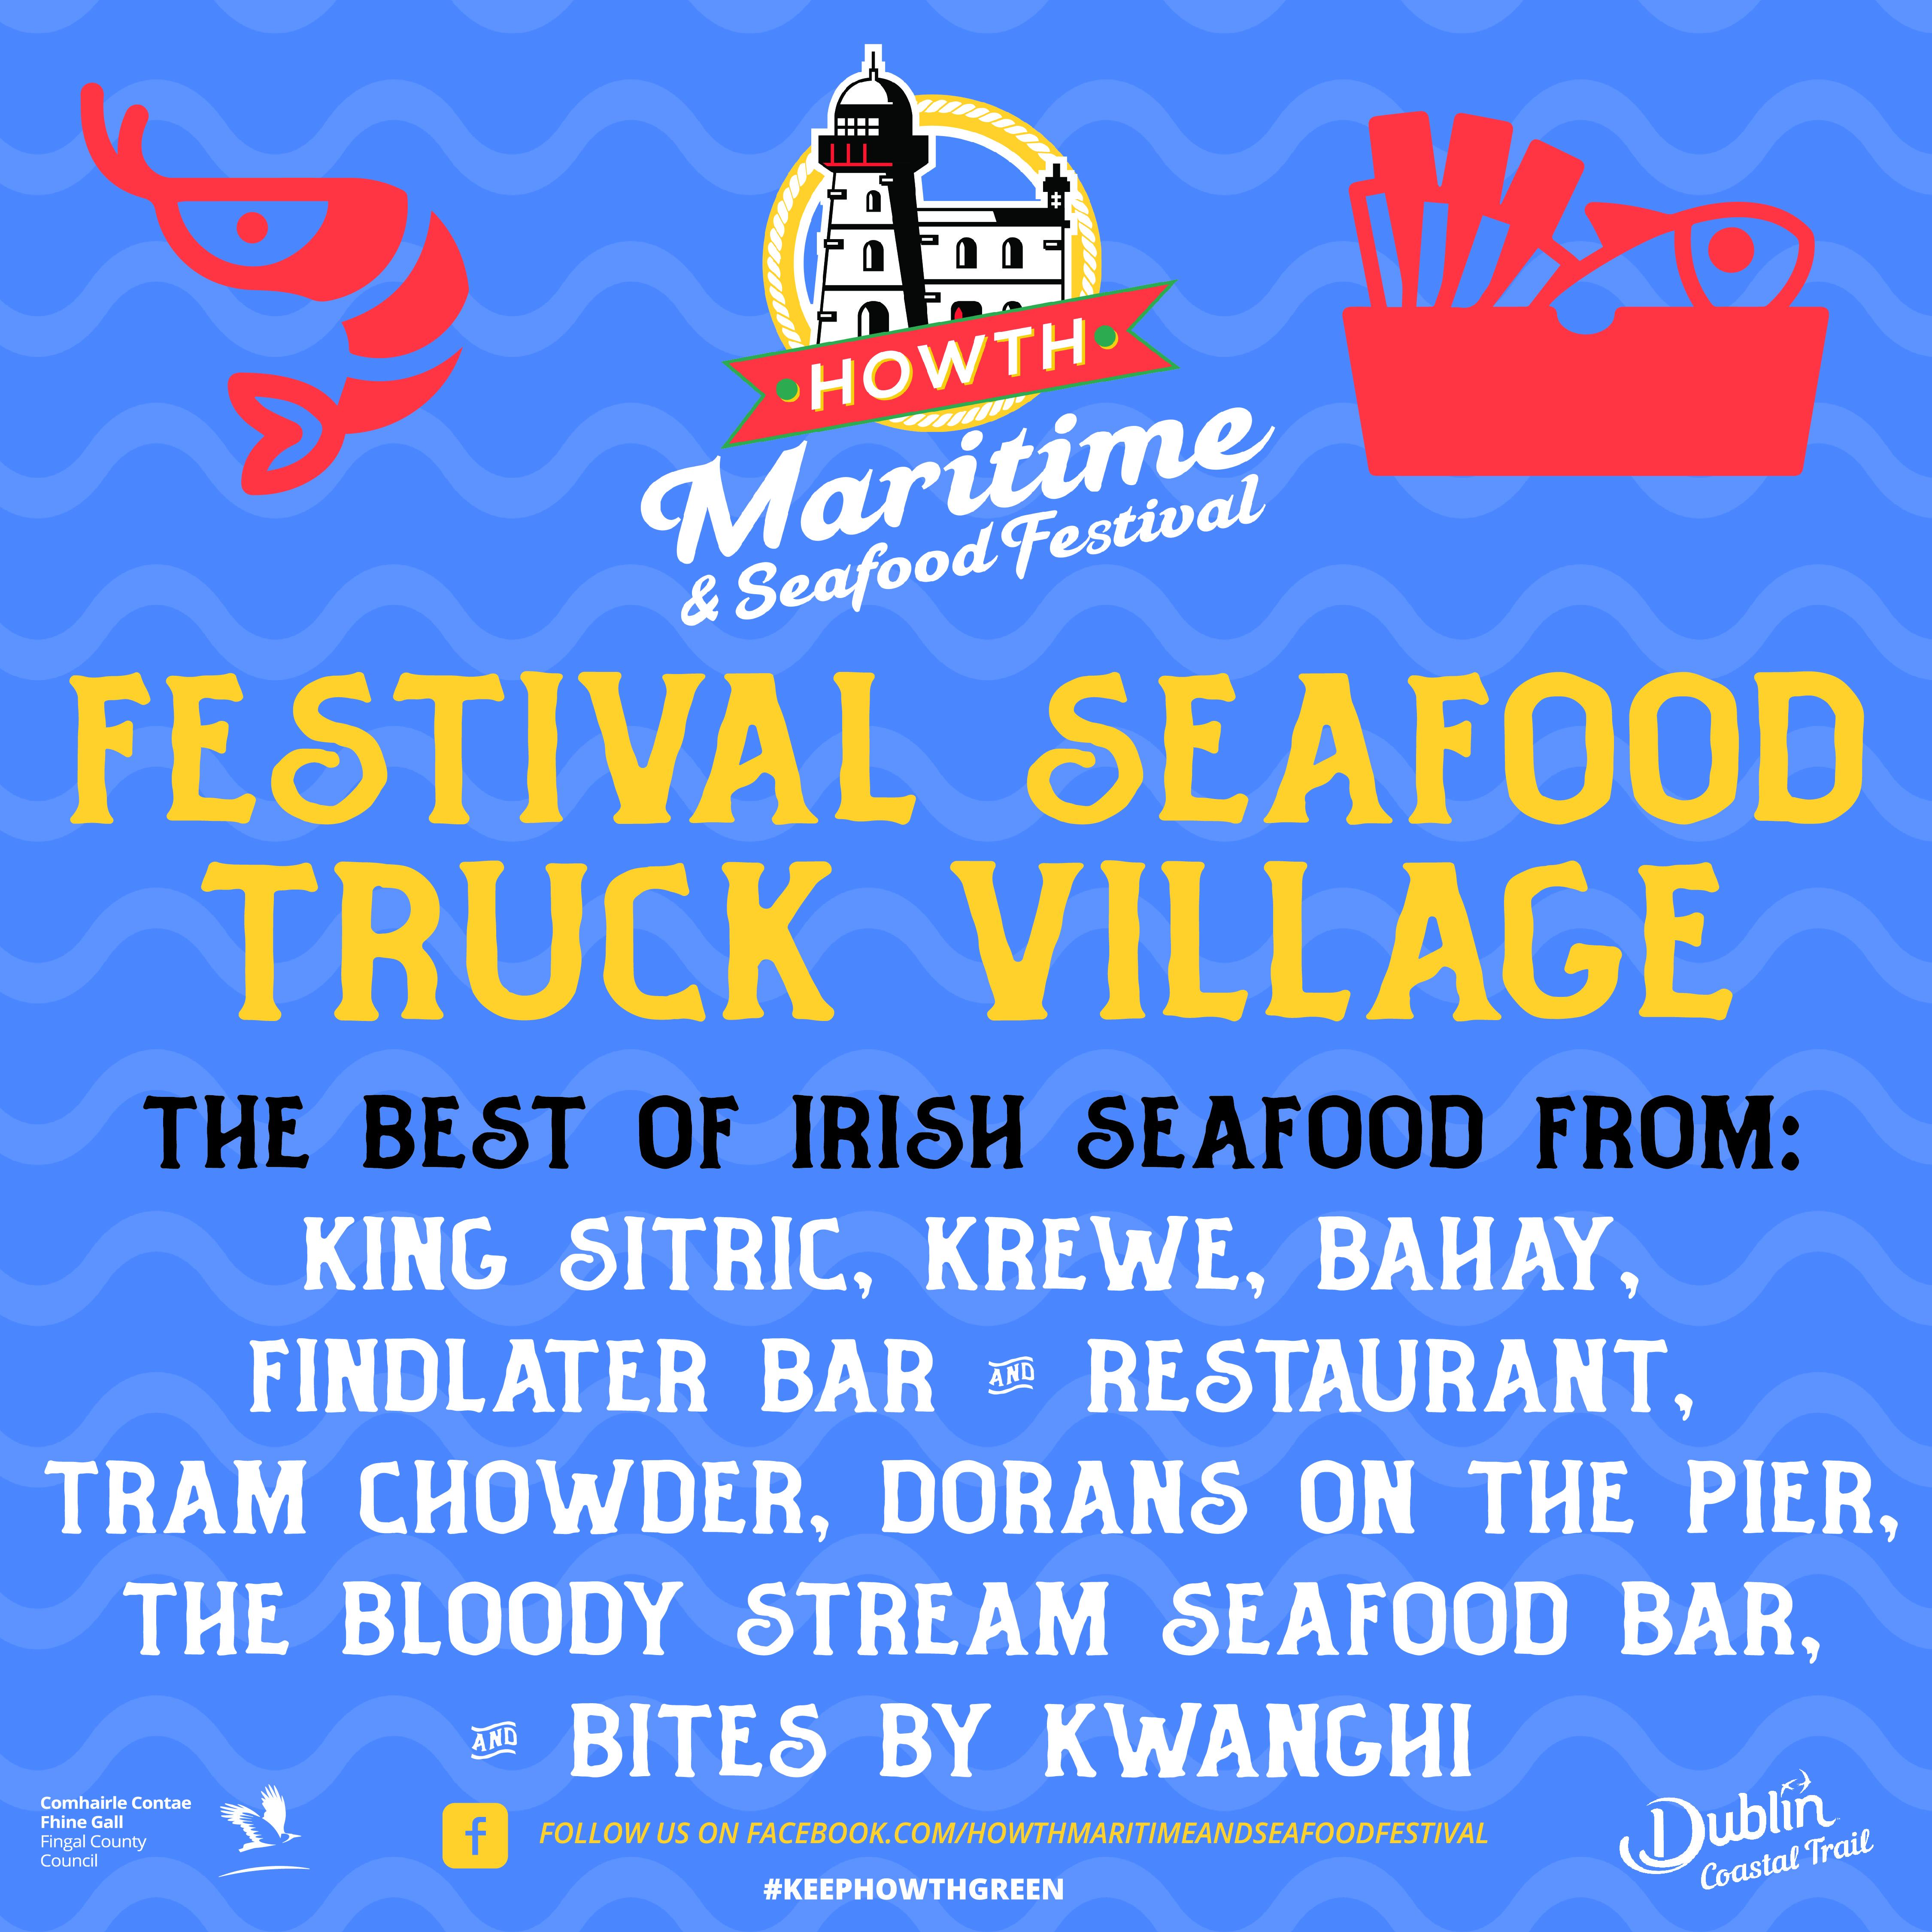 New Festival Seafood Truck Village